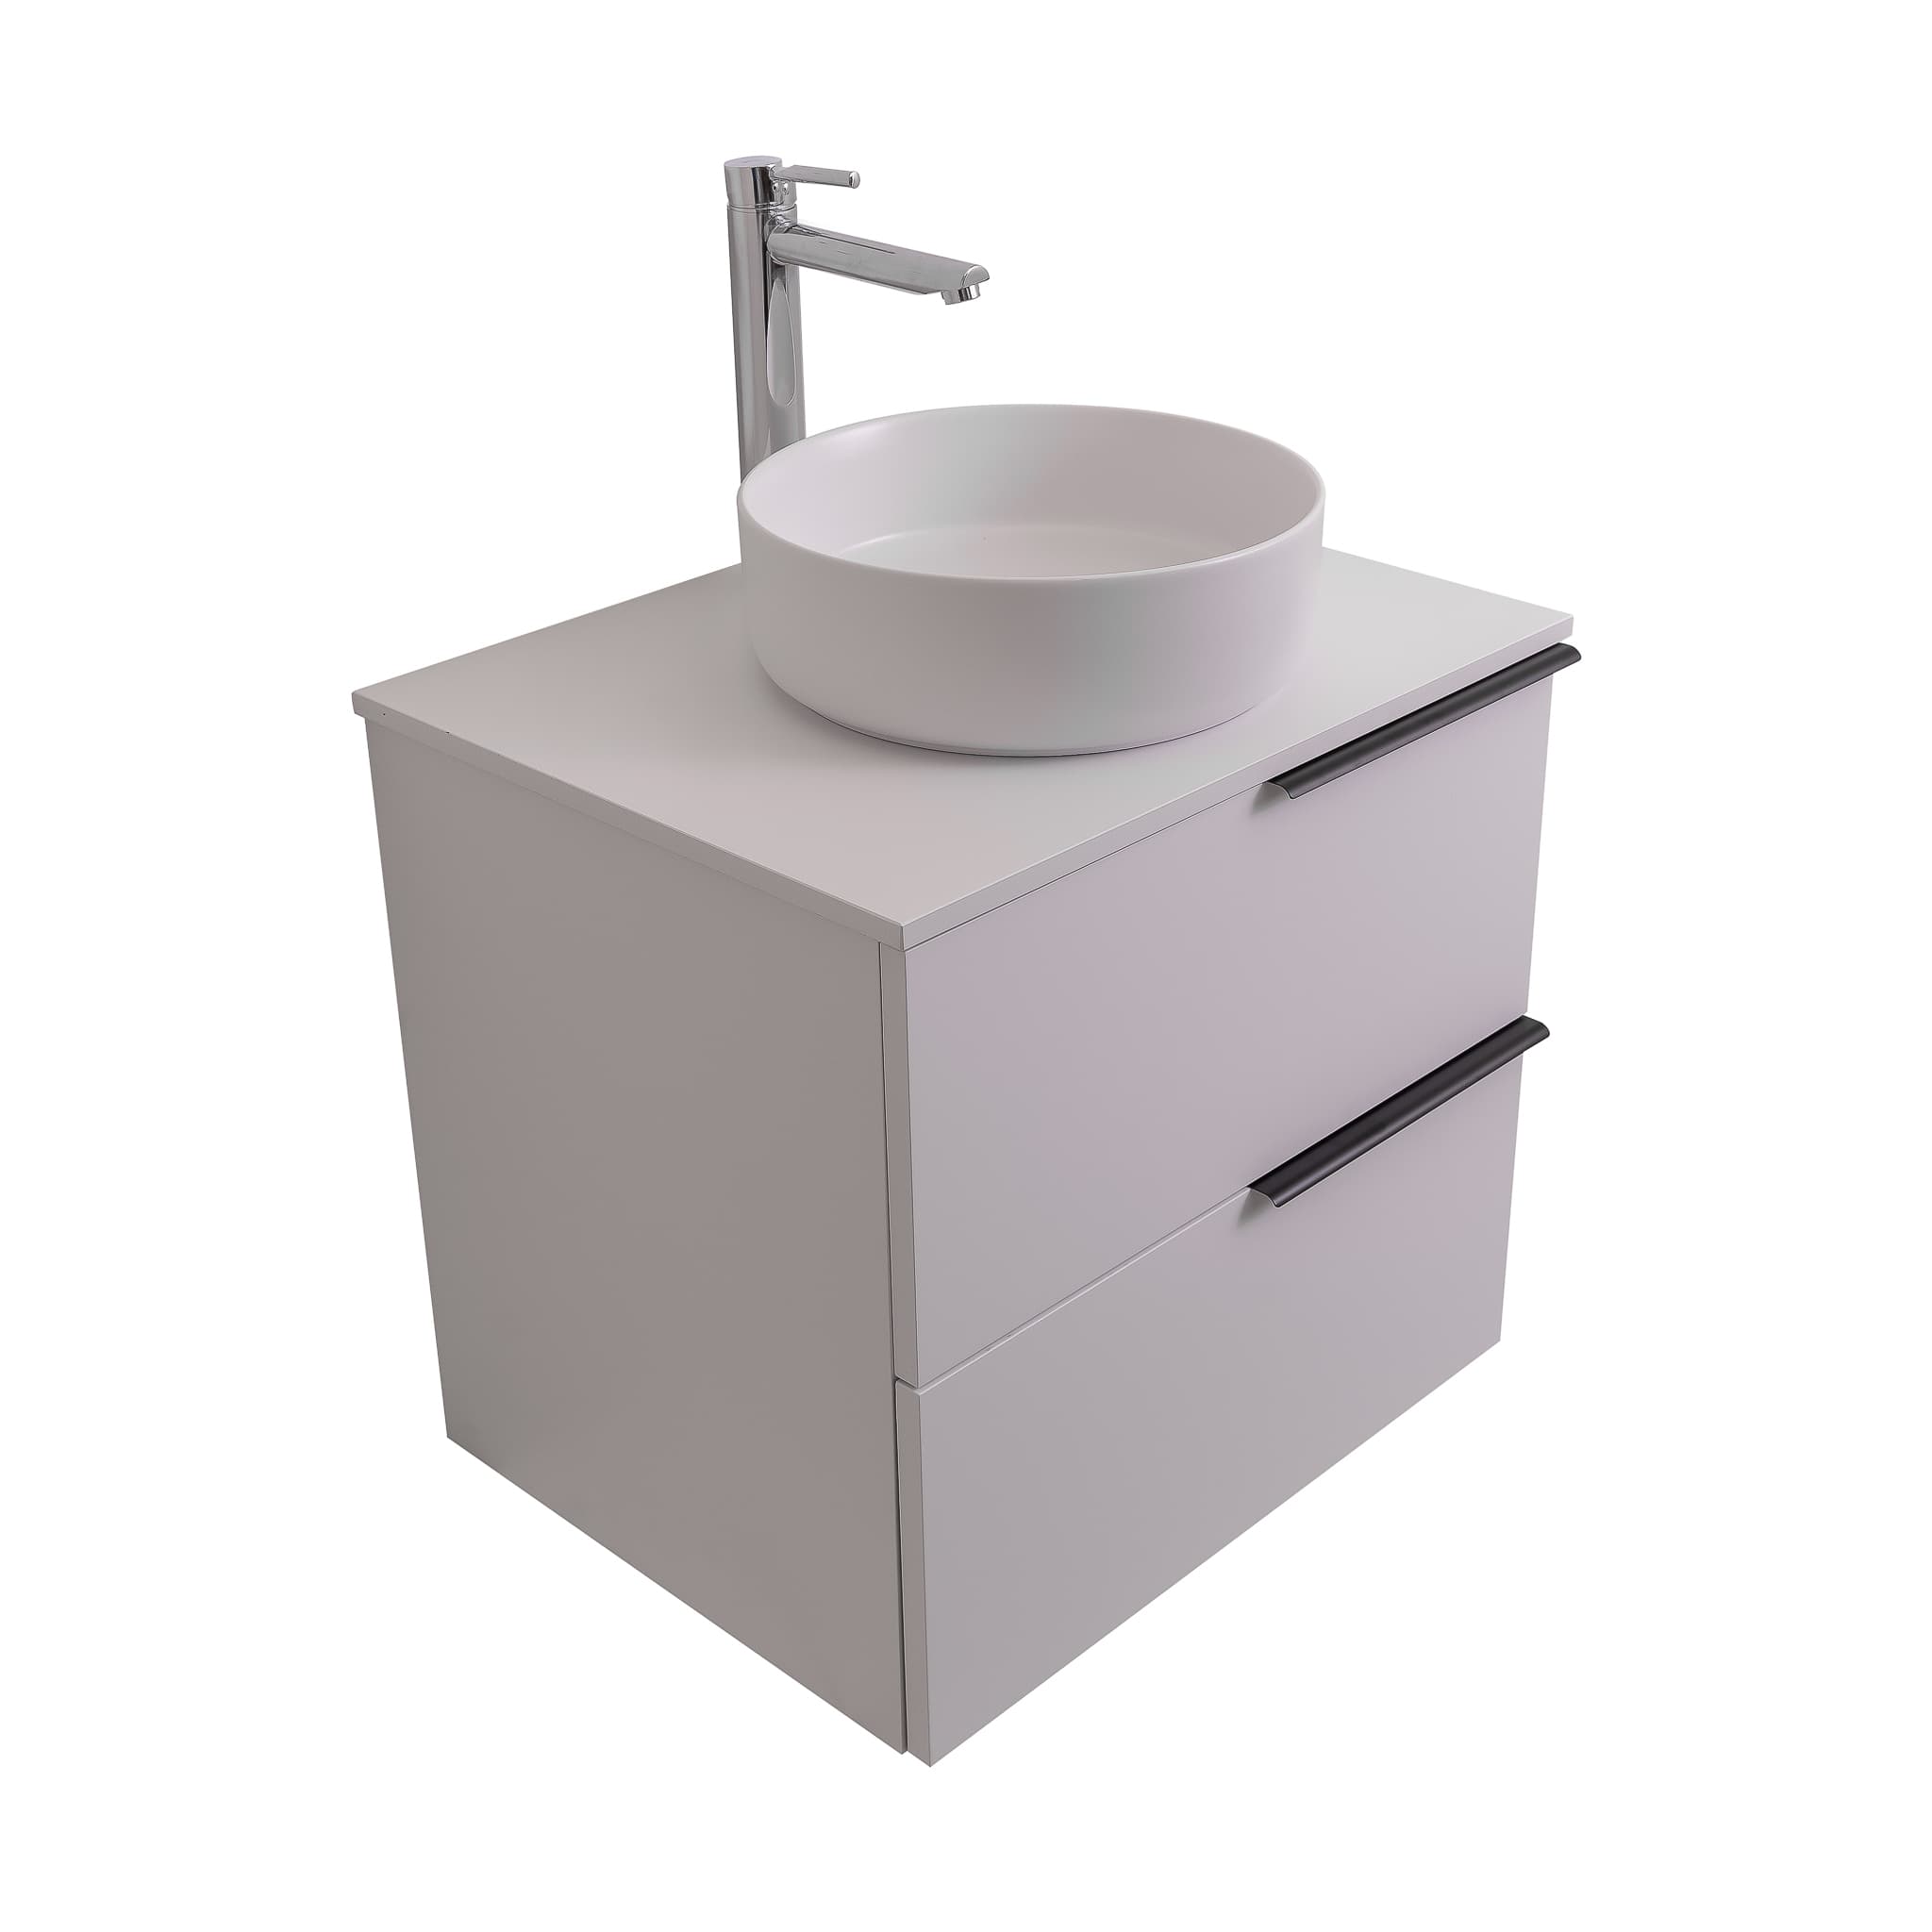 Mallorca 23.5 Matte White Cabinet, Ares White Top And Ares White Ceramic Basin, Wall Mounted Modern Vanity Set